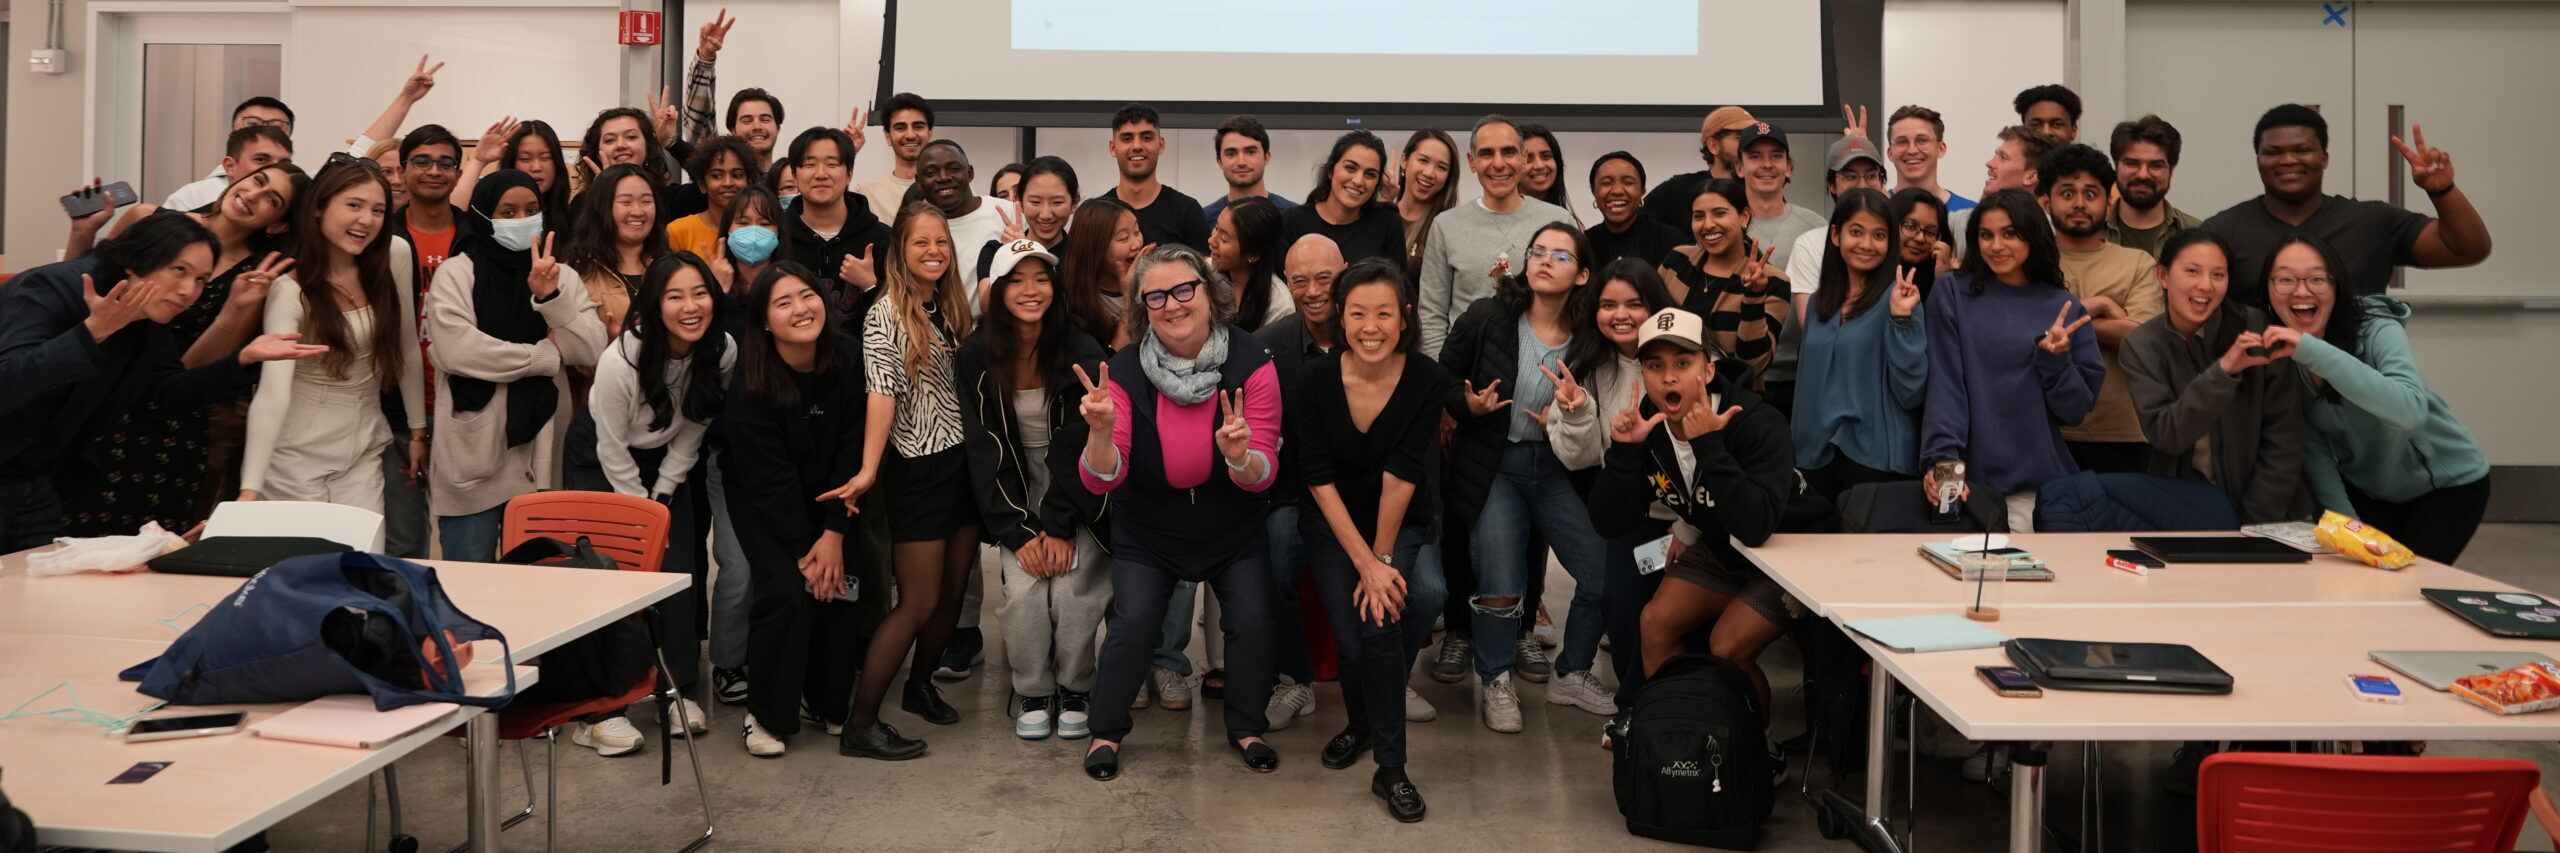 Fun Full Class Photo Past Spring 2023 for Product Management